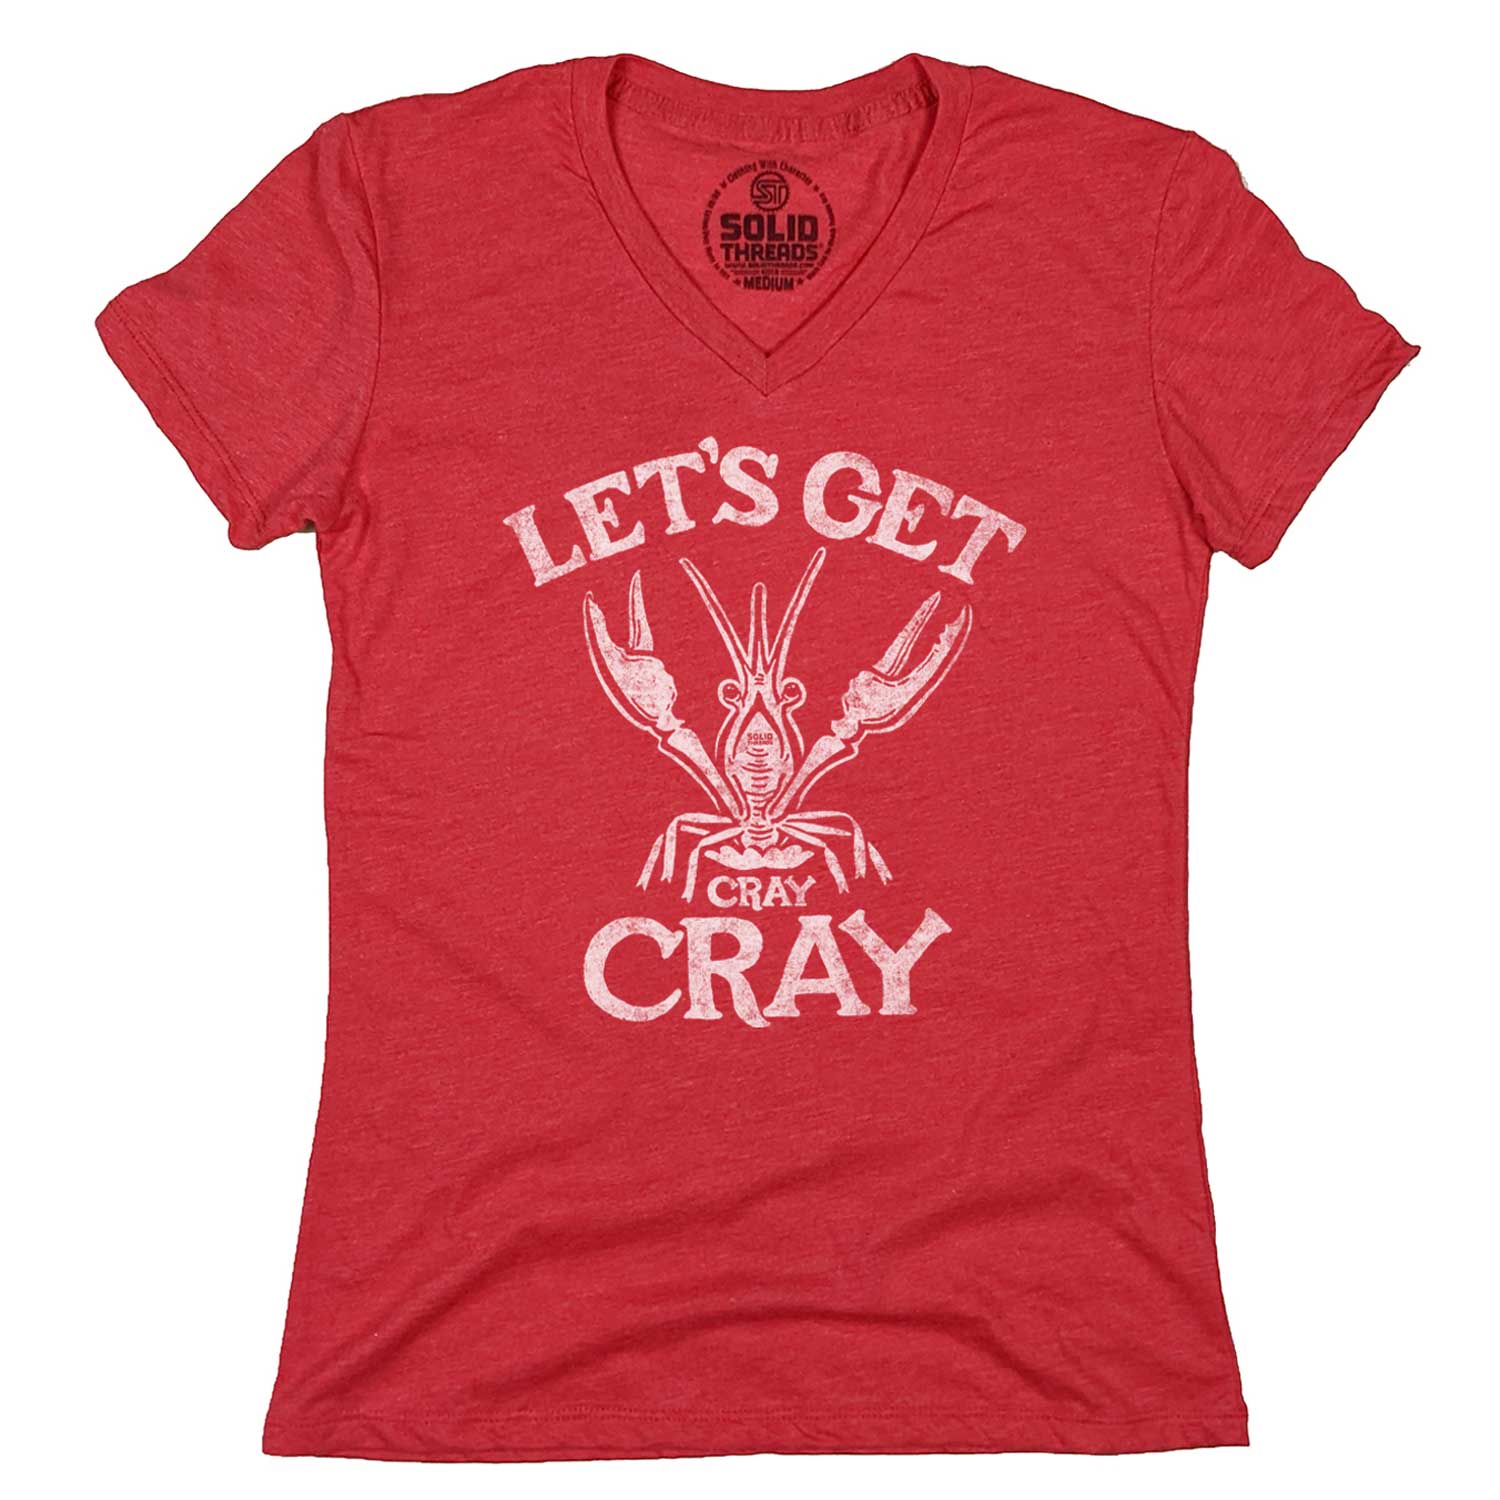 Women's Let's Get Cray Cray Vintage Graphic V-Neck Tee | Funny Crawfish T-shirt | Solid Threads